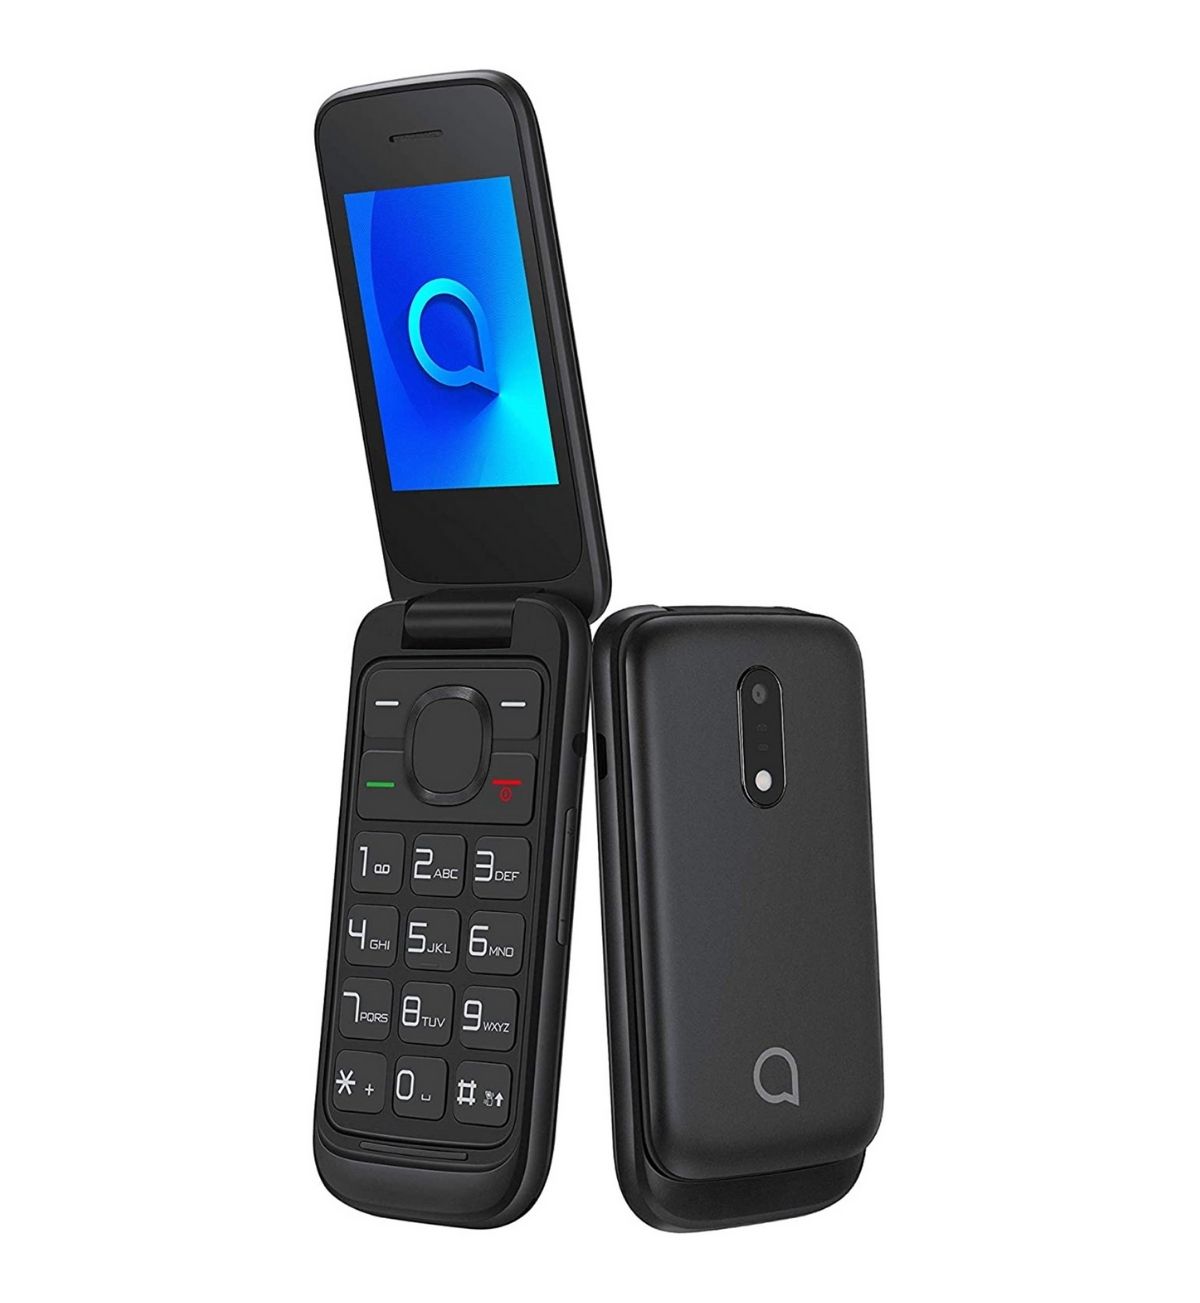 Image of the Alcatel flip phone 2053 in its closed clamshell position, showcasing its sleek design.